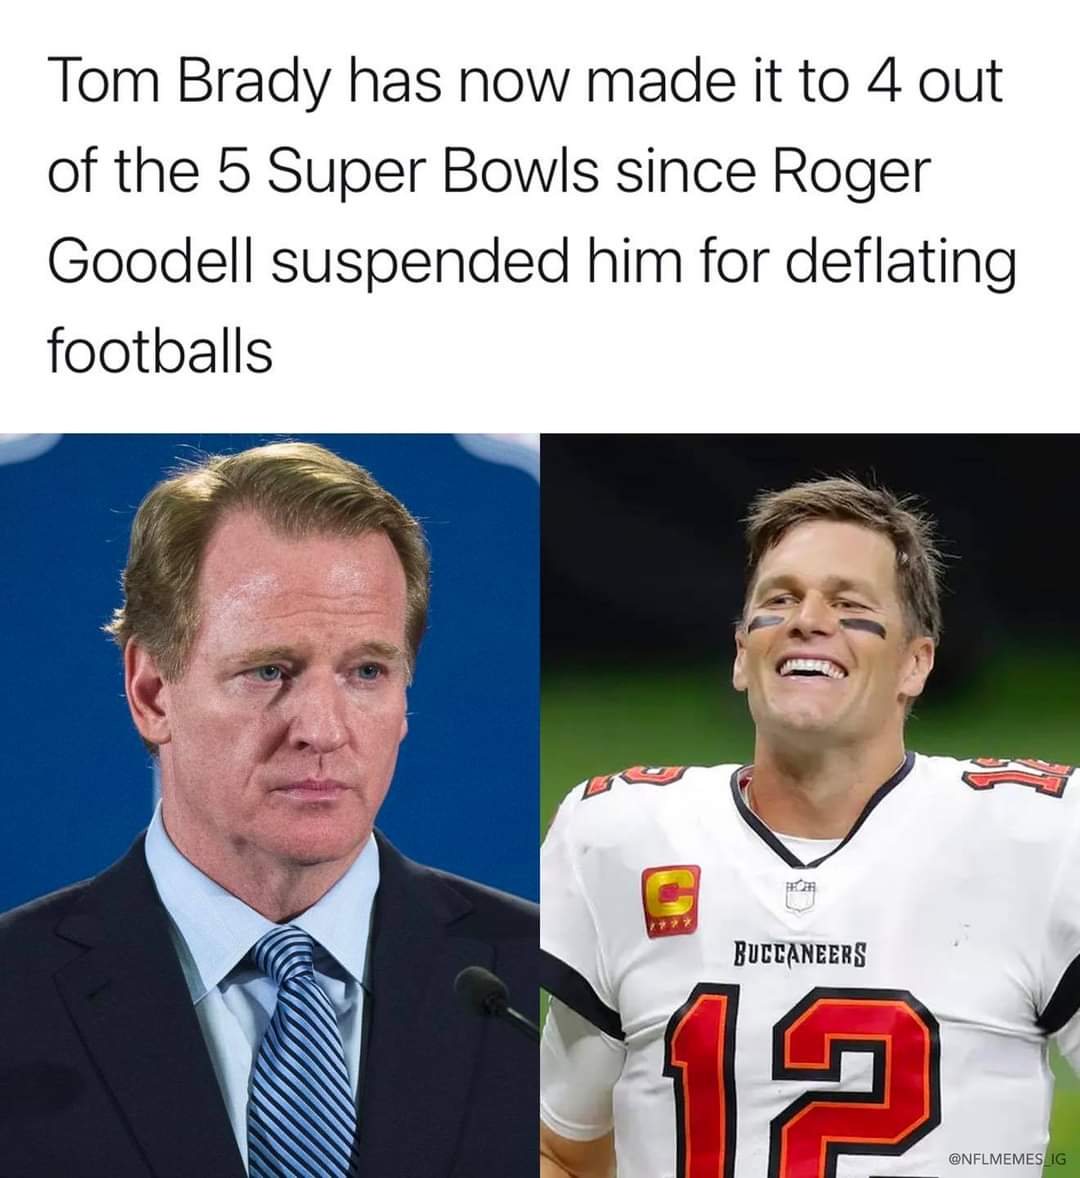 photo caption - Tom Brady has now made it to 4 out of the 5 Super Bowls since Roger Goodell suspended him for deflating footballs Buccaneers 12 Ig